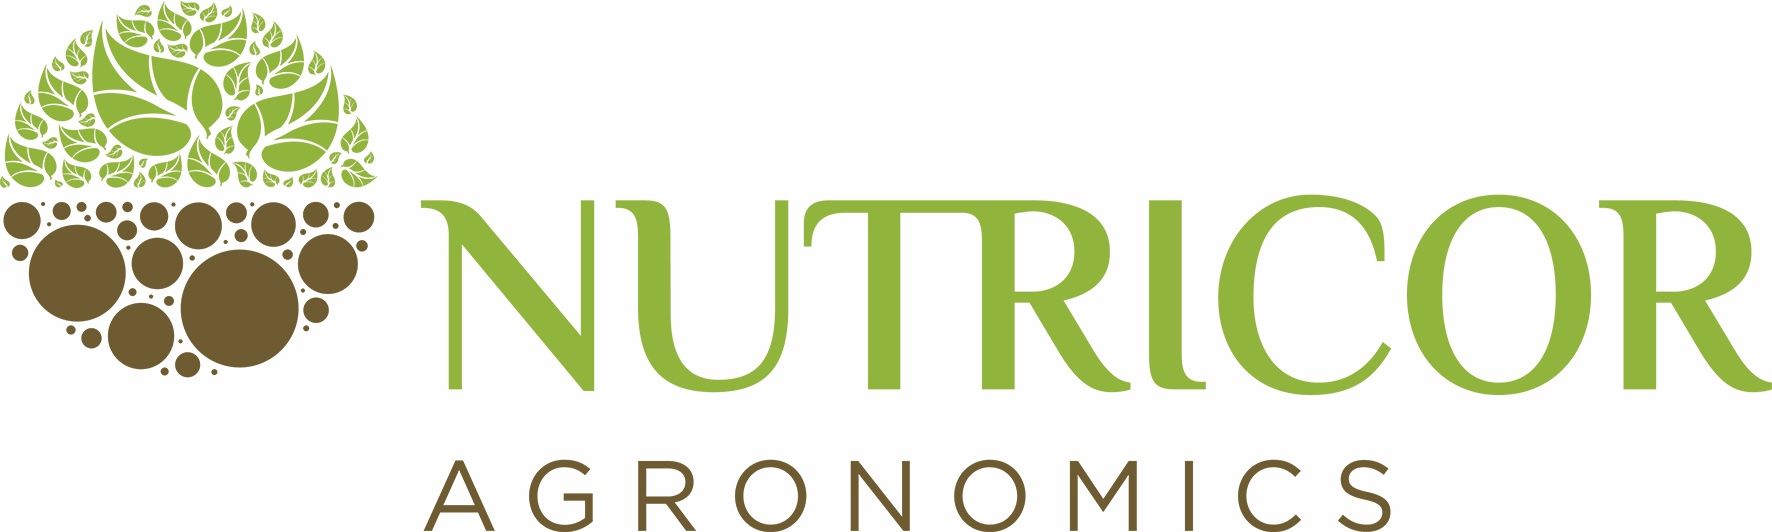 NUTRICOR AGRONOMICS LIMITED 